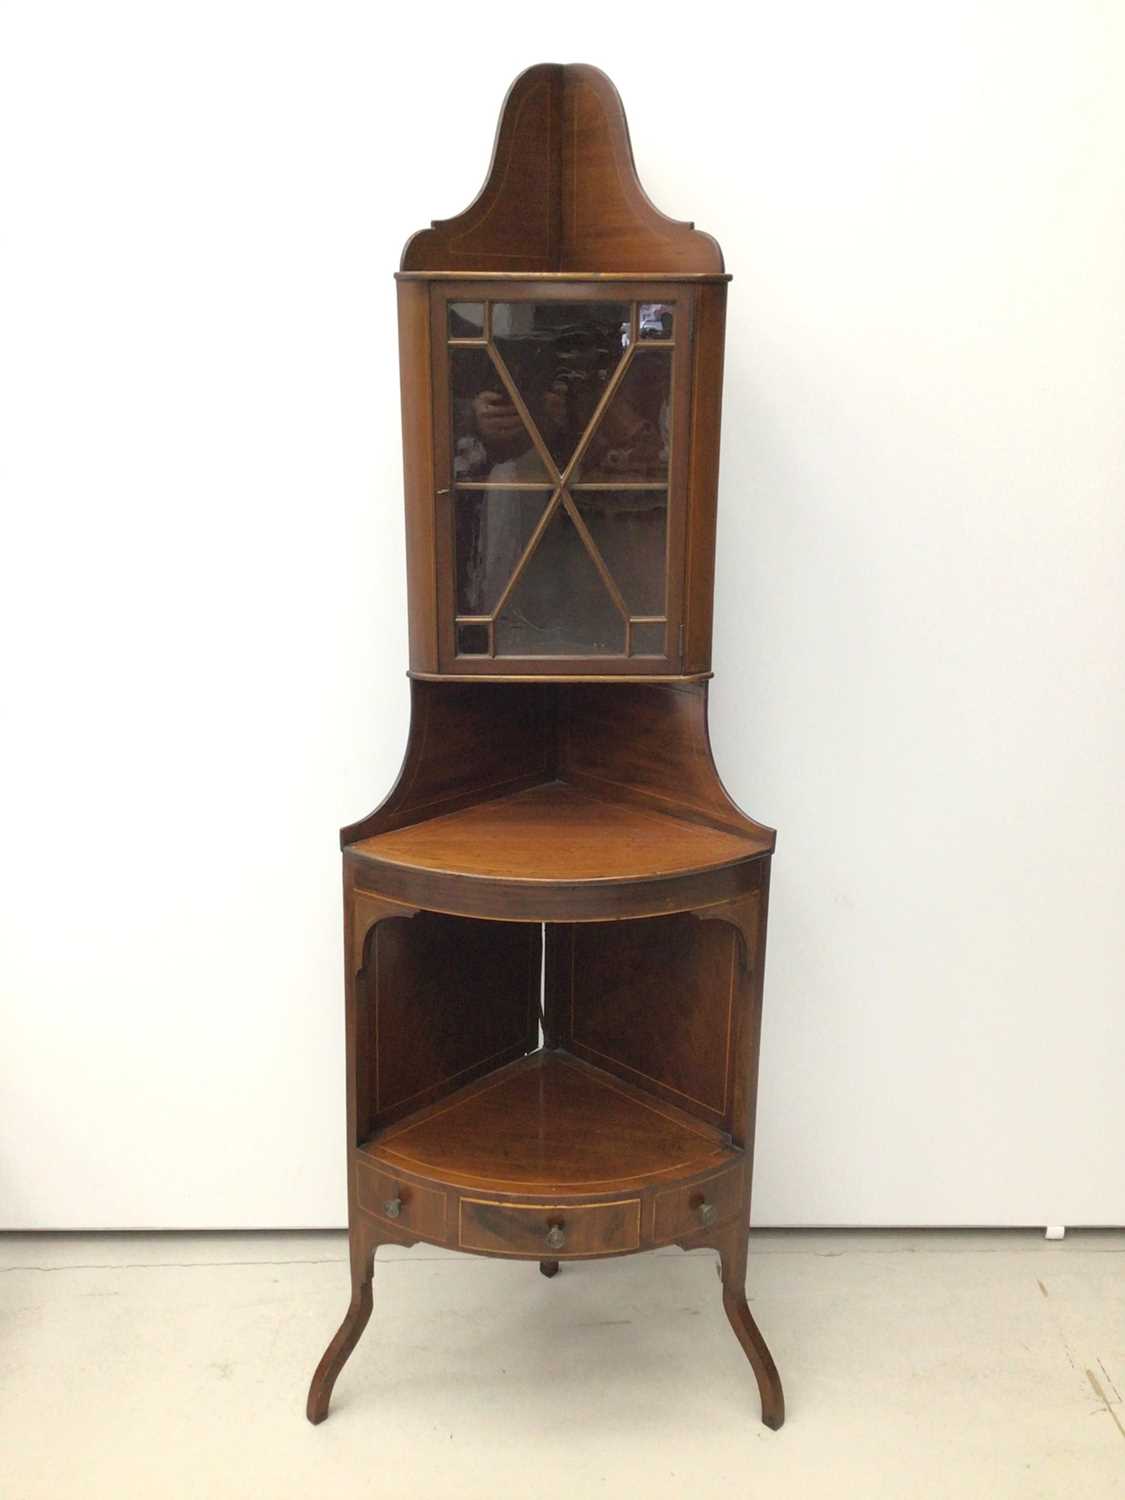 Lot 9 - 19th century inlaid mahogany corner cupboard, standing on bowfronted base, adapted from a corner washstand